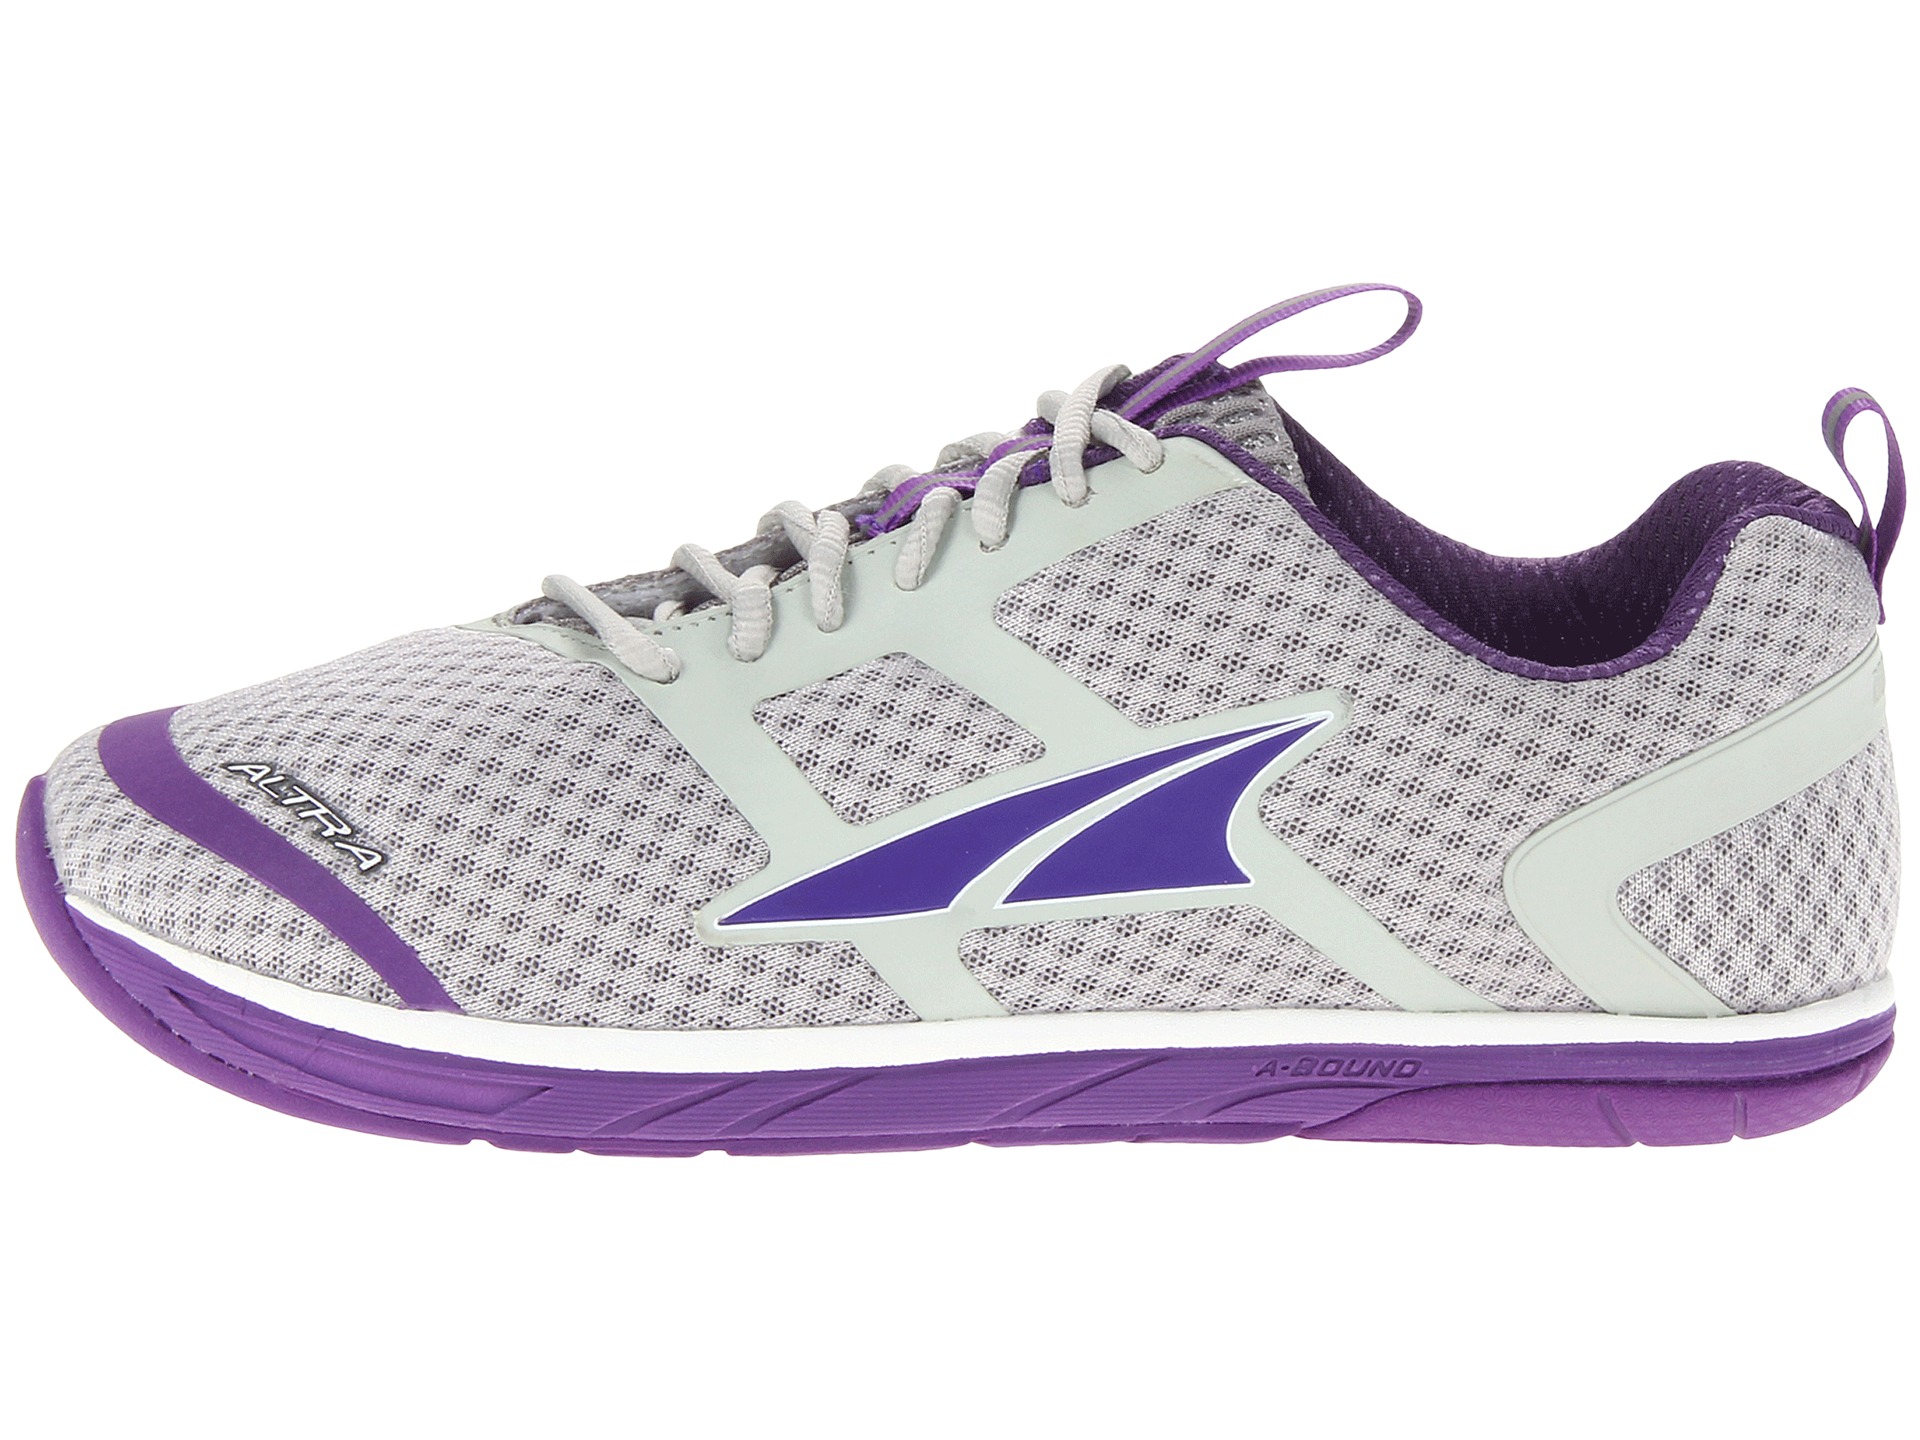 Altra Zero Drop Footwear Provisioness 1 5 | Shipped Free at Zappos